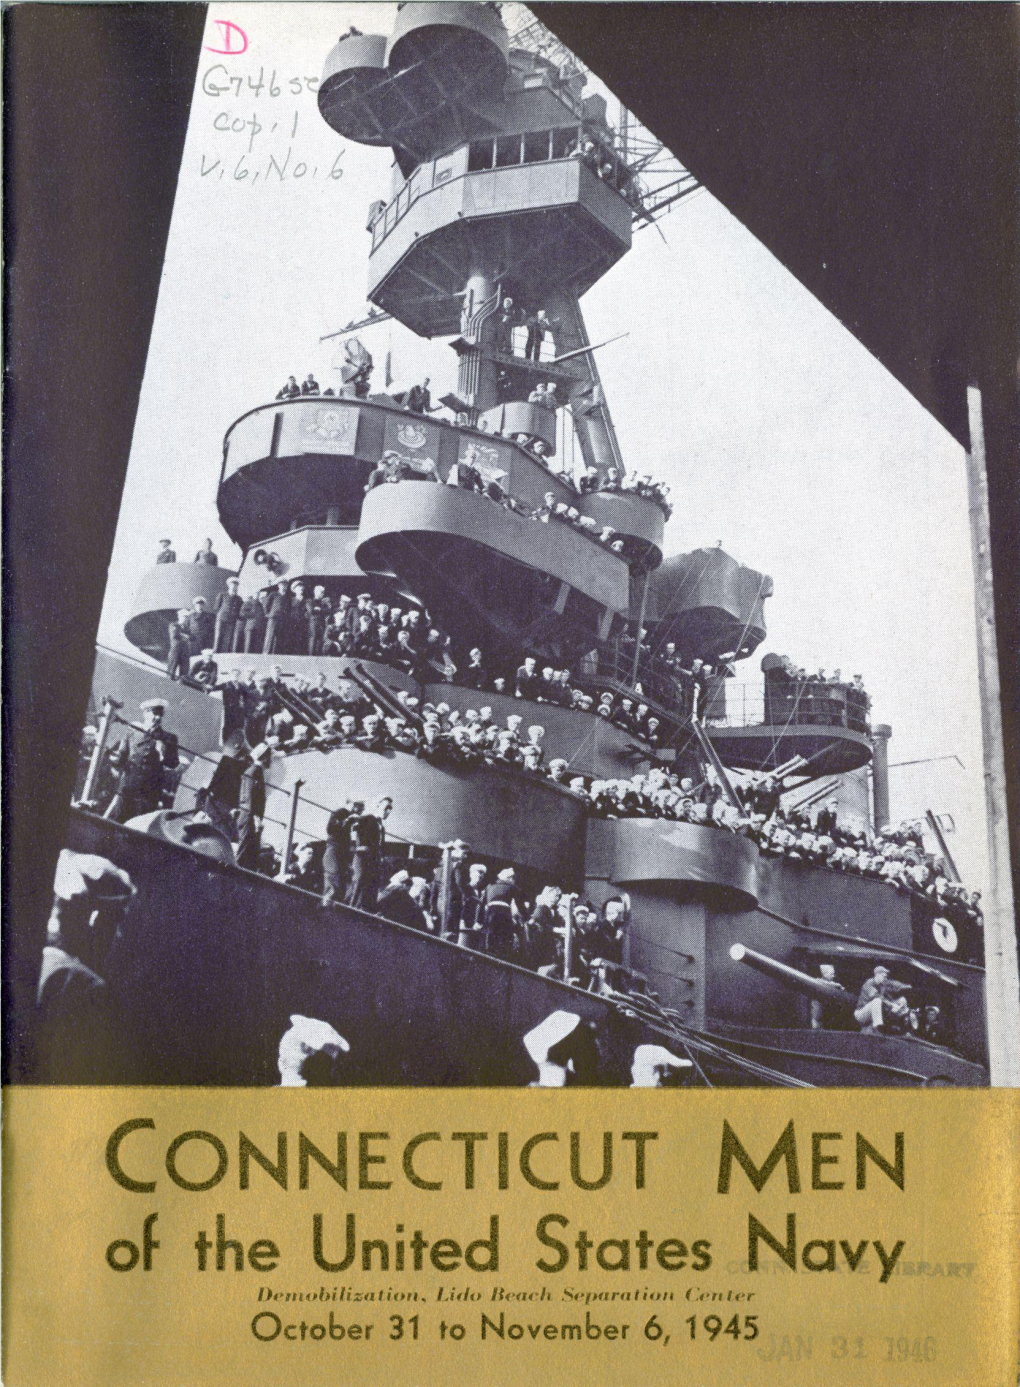 CONNECTICUT M E N of the United States Navy